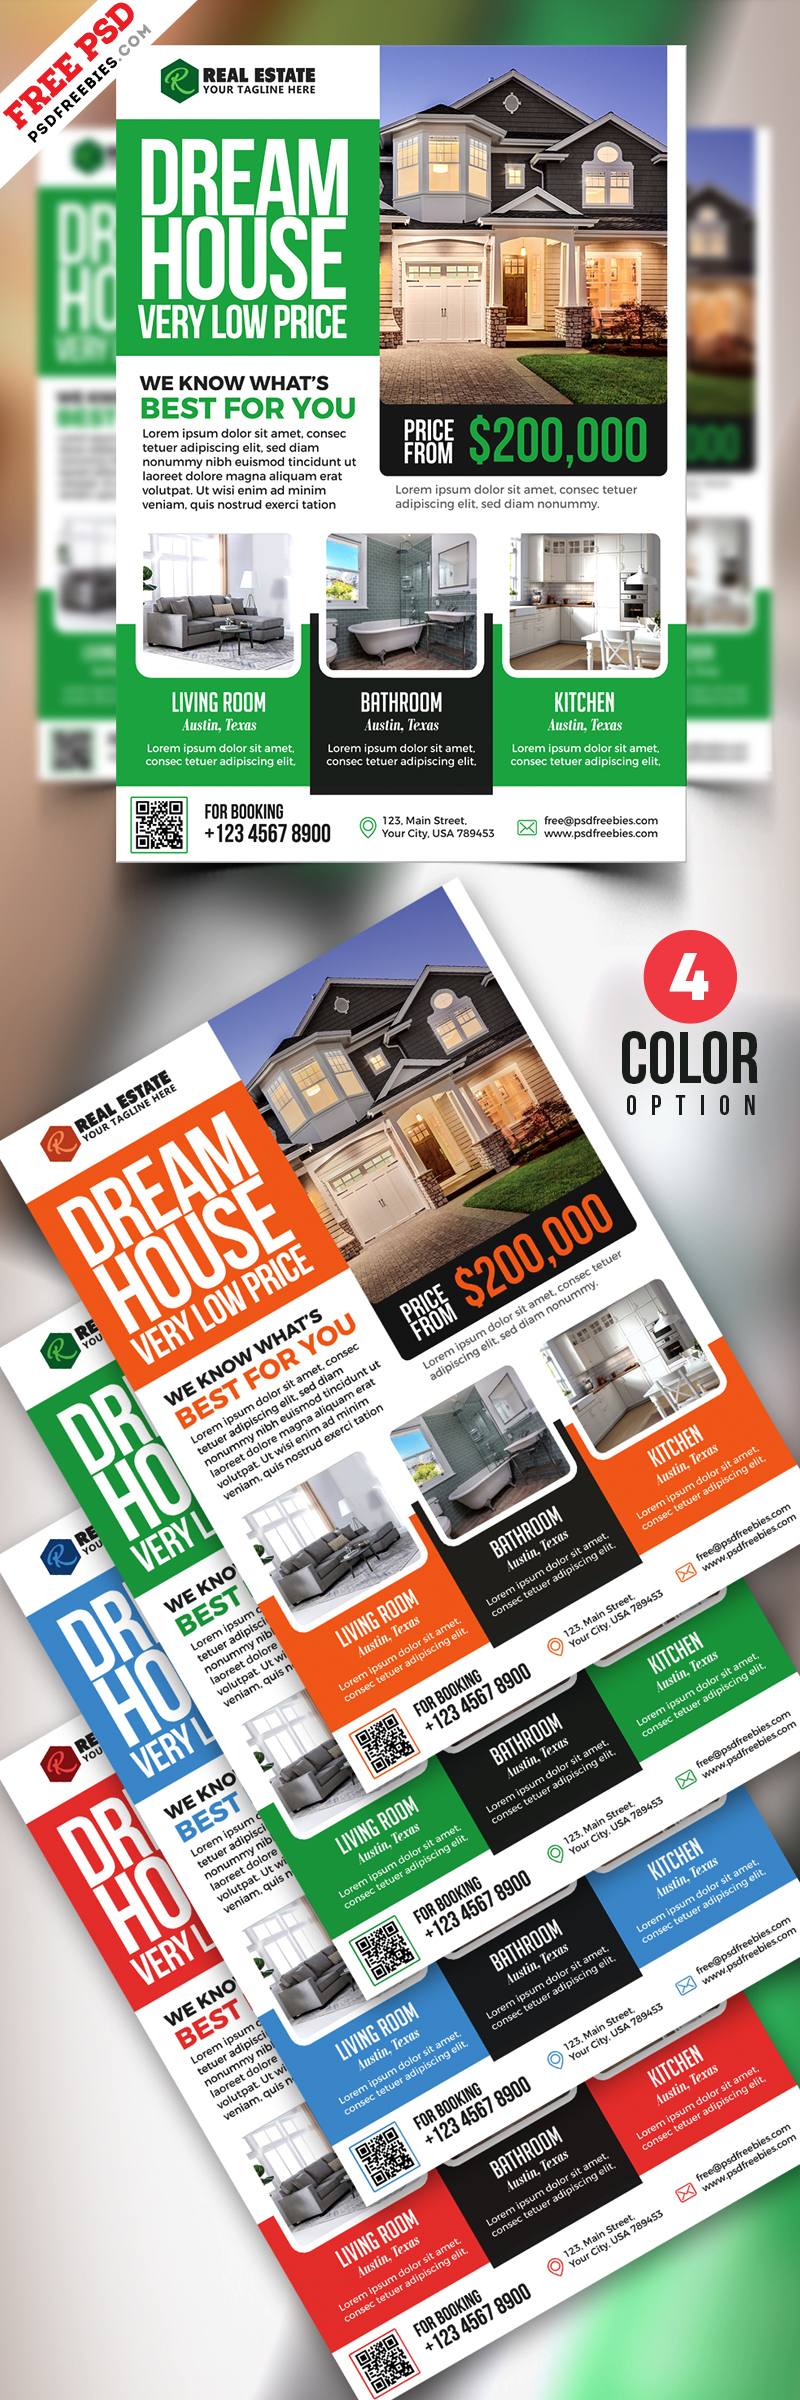 PSD Real Estate Flyer Templates – PSDFreebies.com Within Free Real Estate Flyer Templates Download